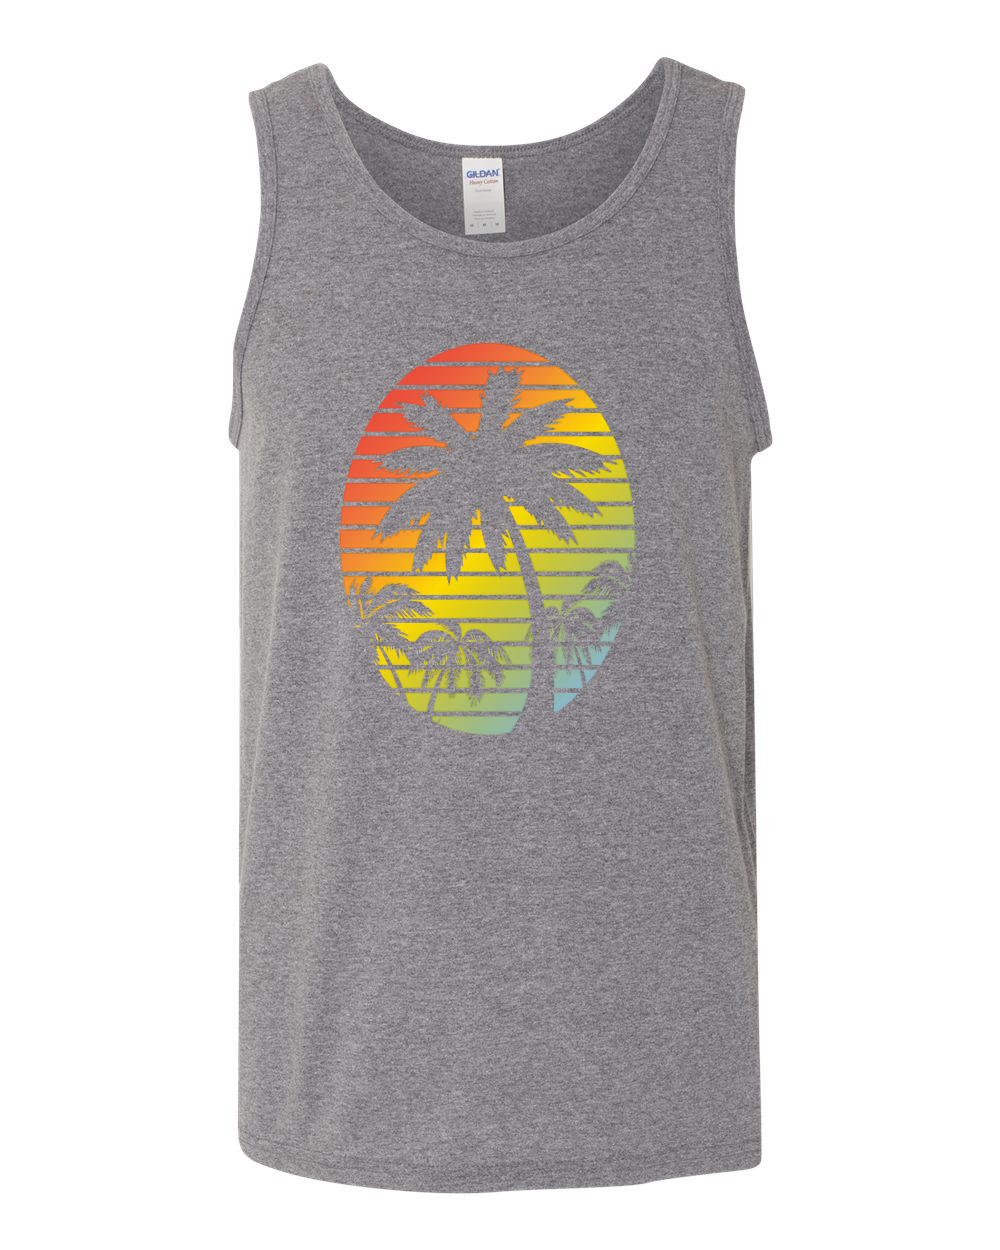 Tropical Palm Trees Silhouettes with Sunset | Mens Pop Culture Graphic Tank Top, Heather Grey, X-Large - image 2 of 4